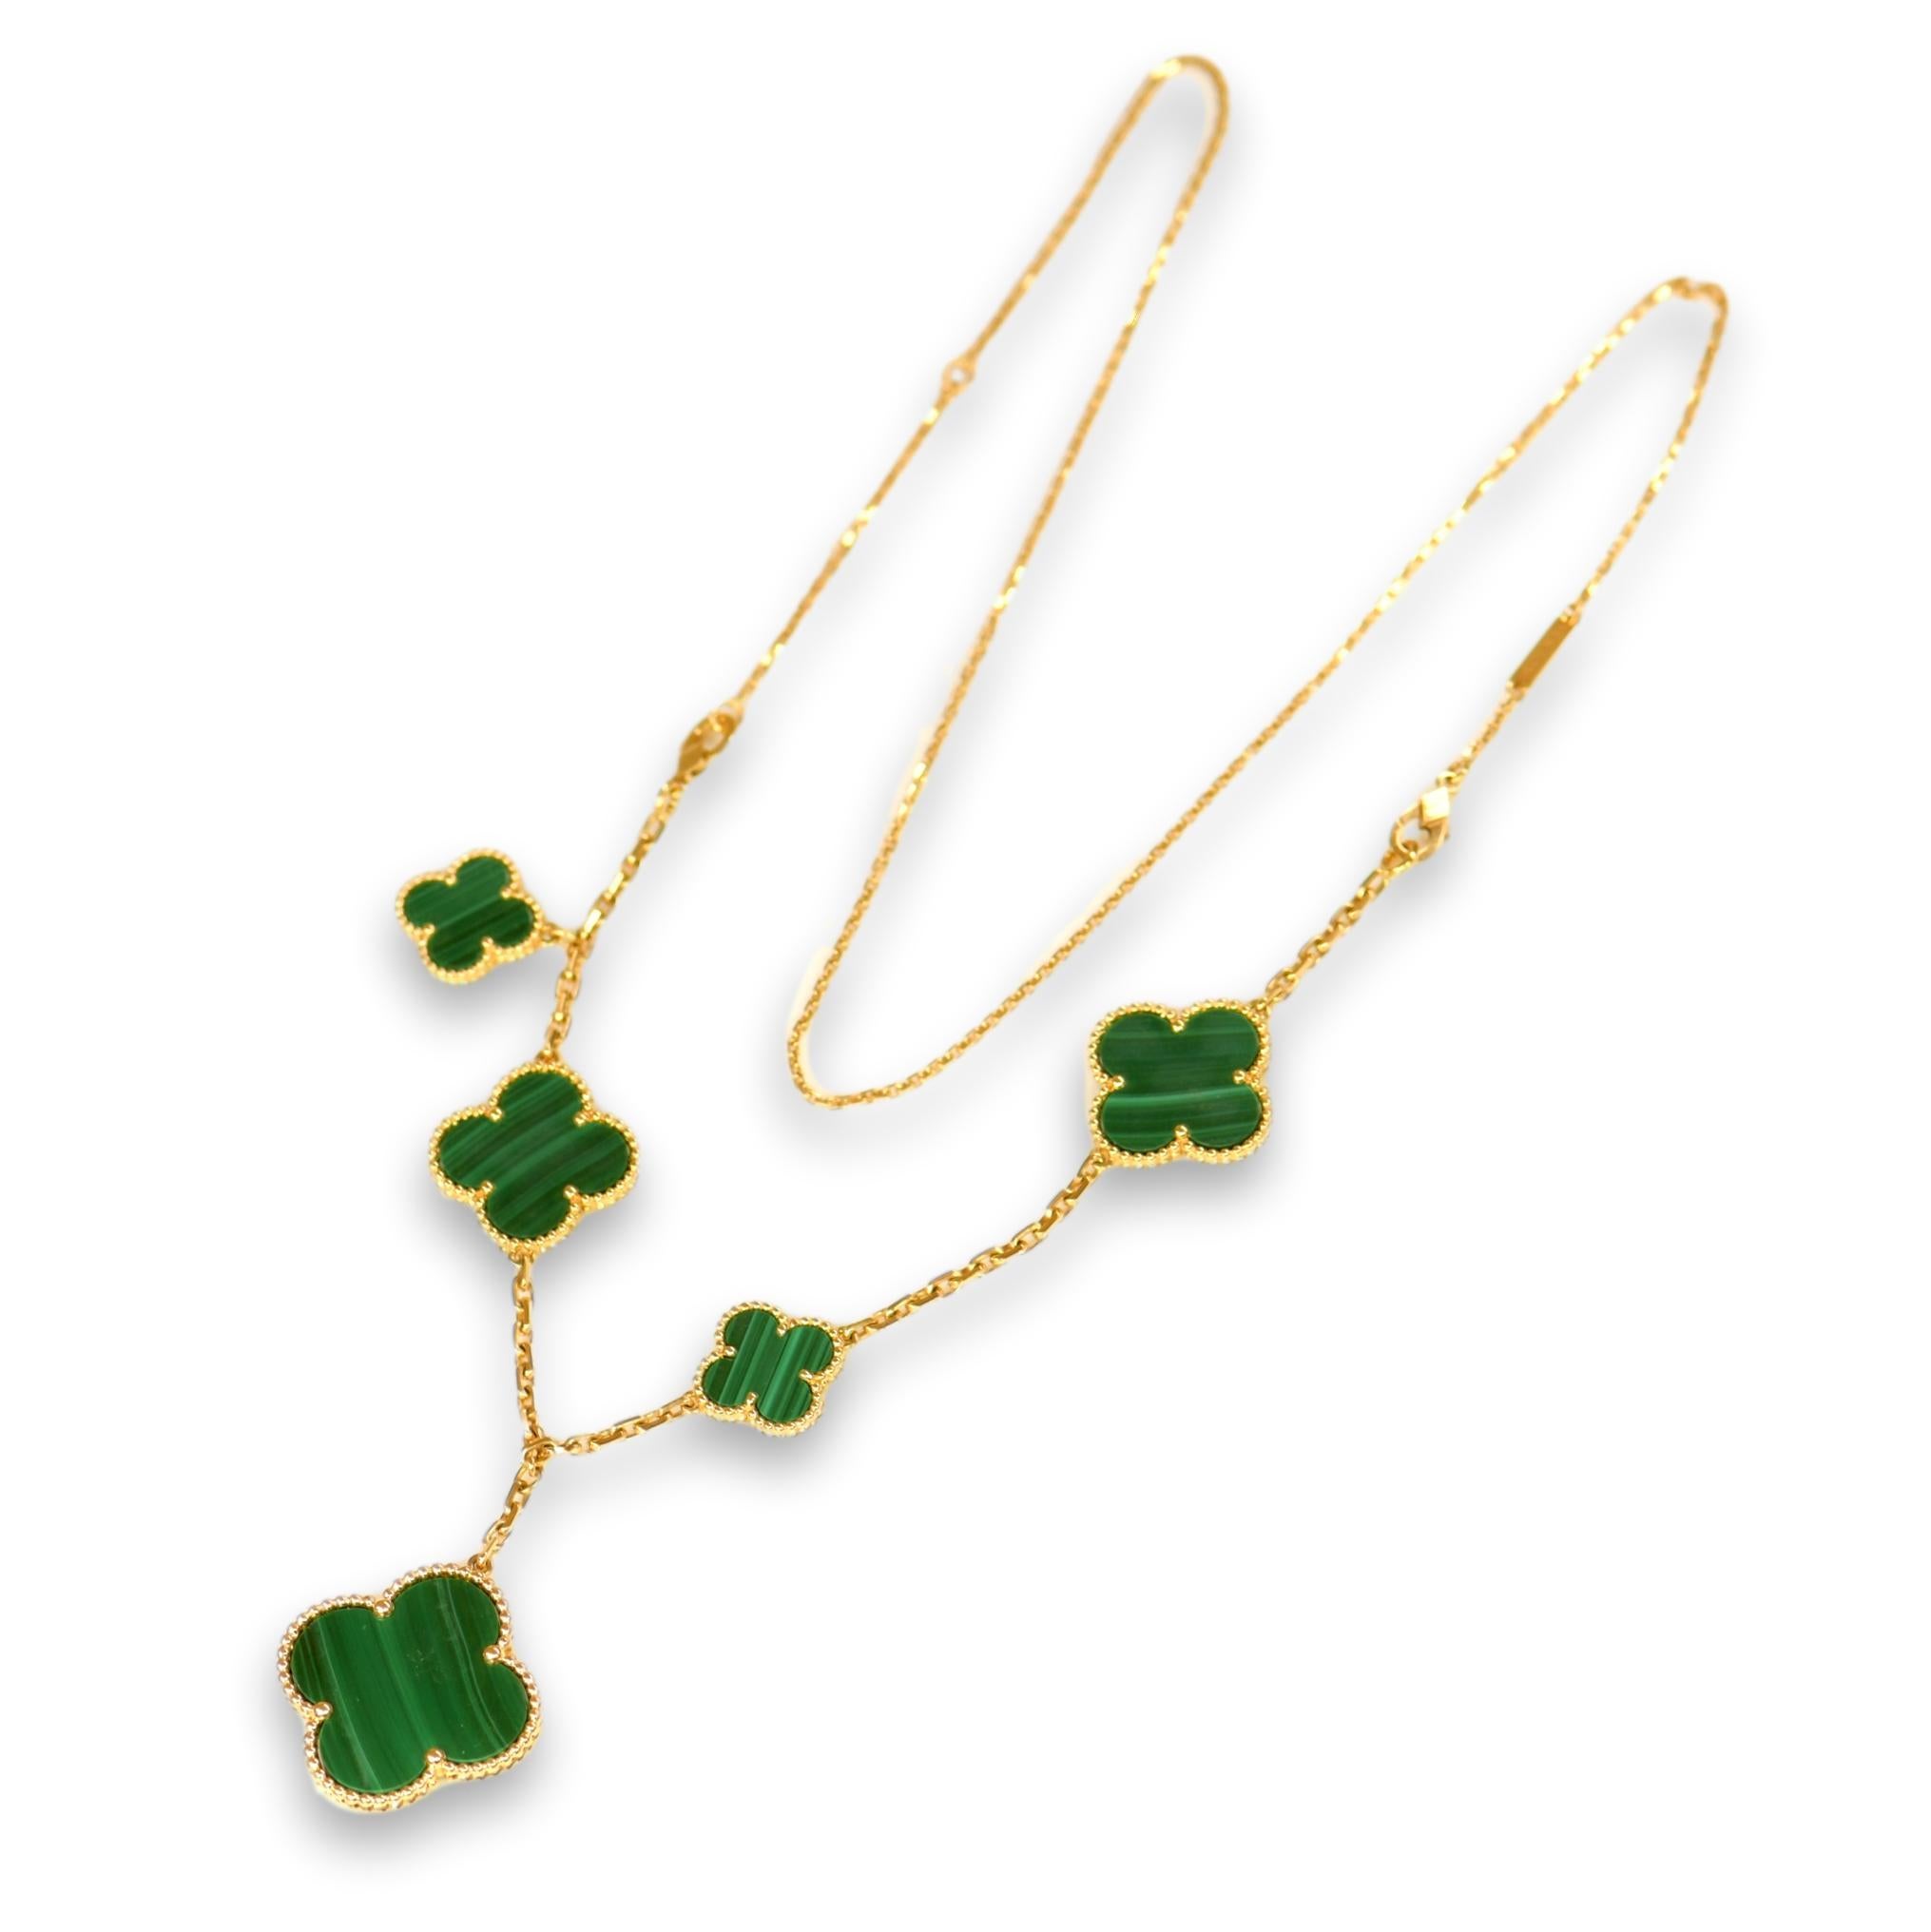 Alhambra is VCA's signature design and the Malachite makes it even more special. This is a limited rare piece. You won't find them on market very often.

It also comes with a 46cm 18k gold VCA chain with serial number which means you can also wear